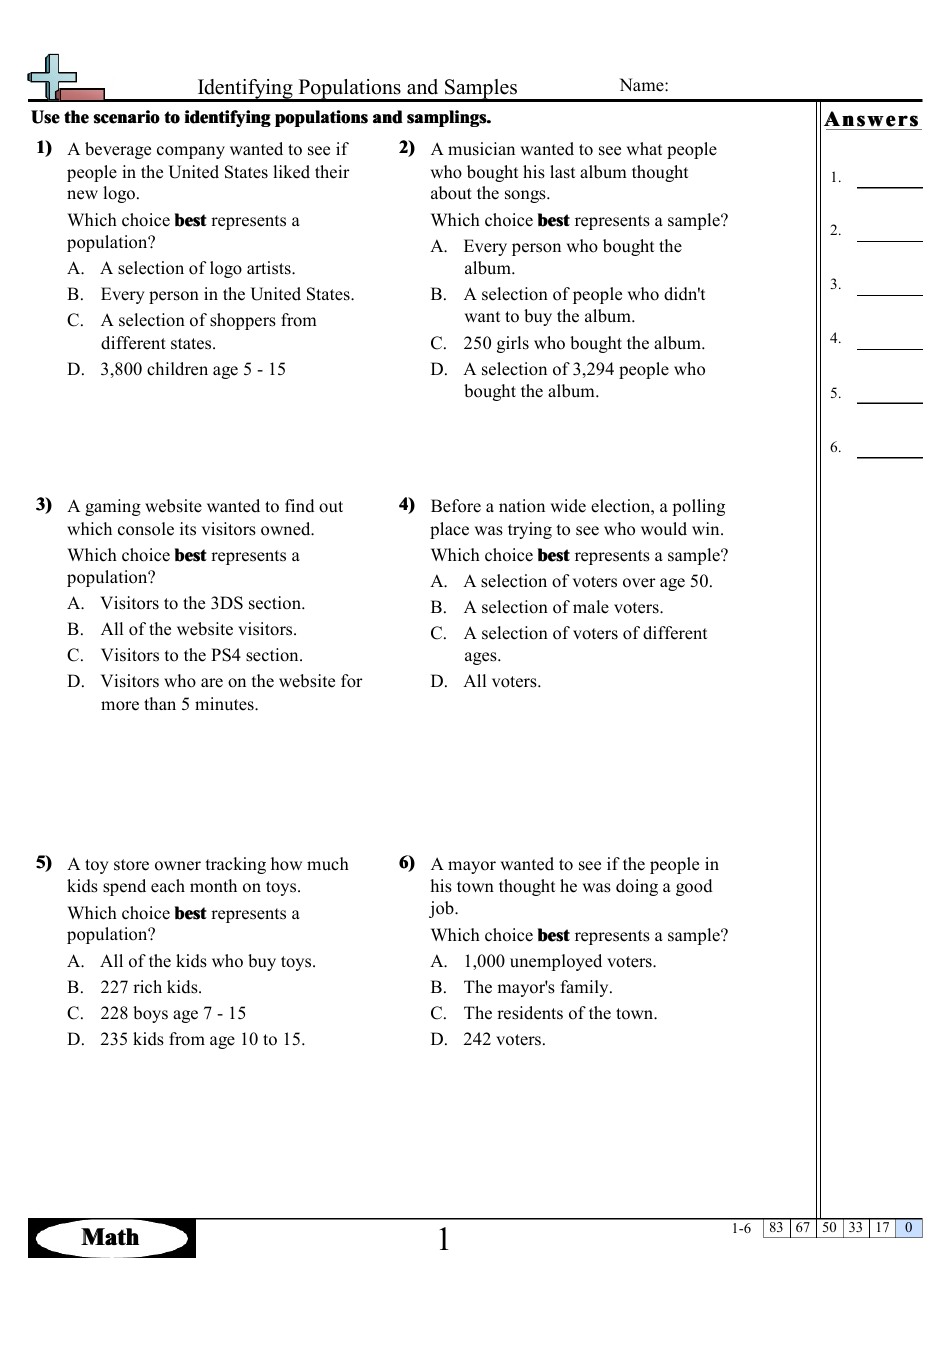 Identifying Populations and Samples Worksheet image preview